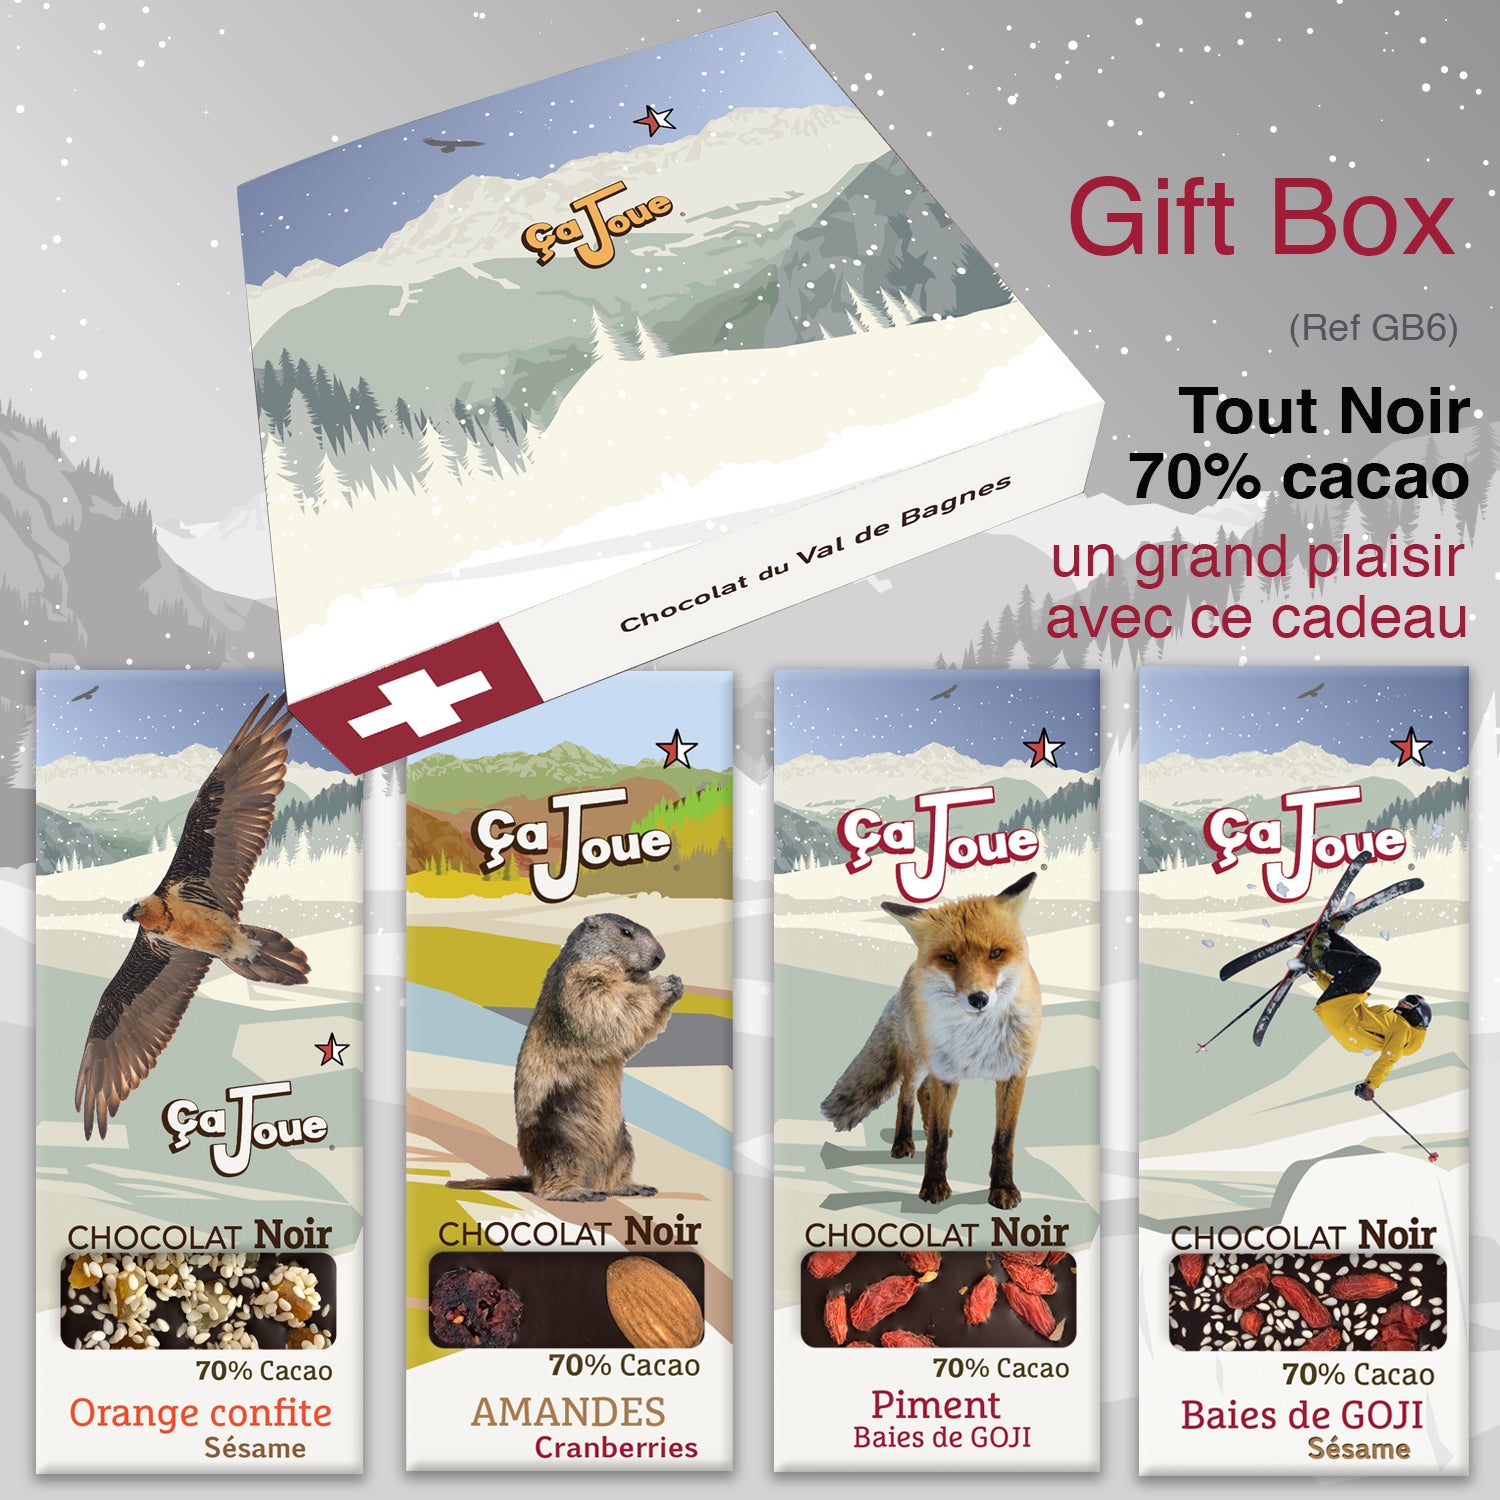 Gift Box (Ref GB6) Chocolate from Val de Bagnes